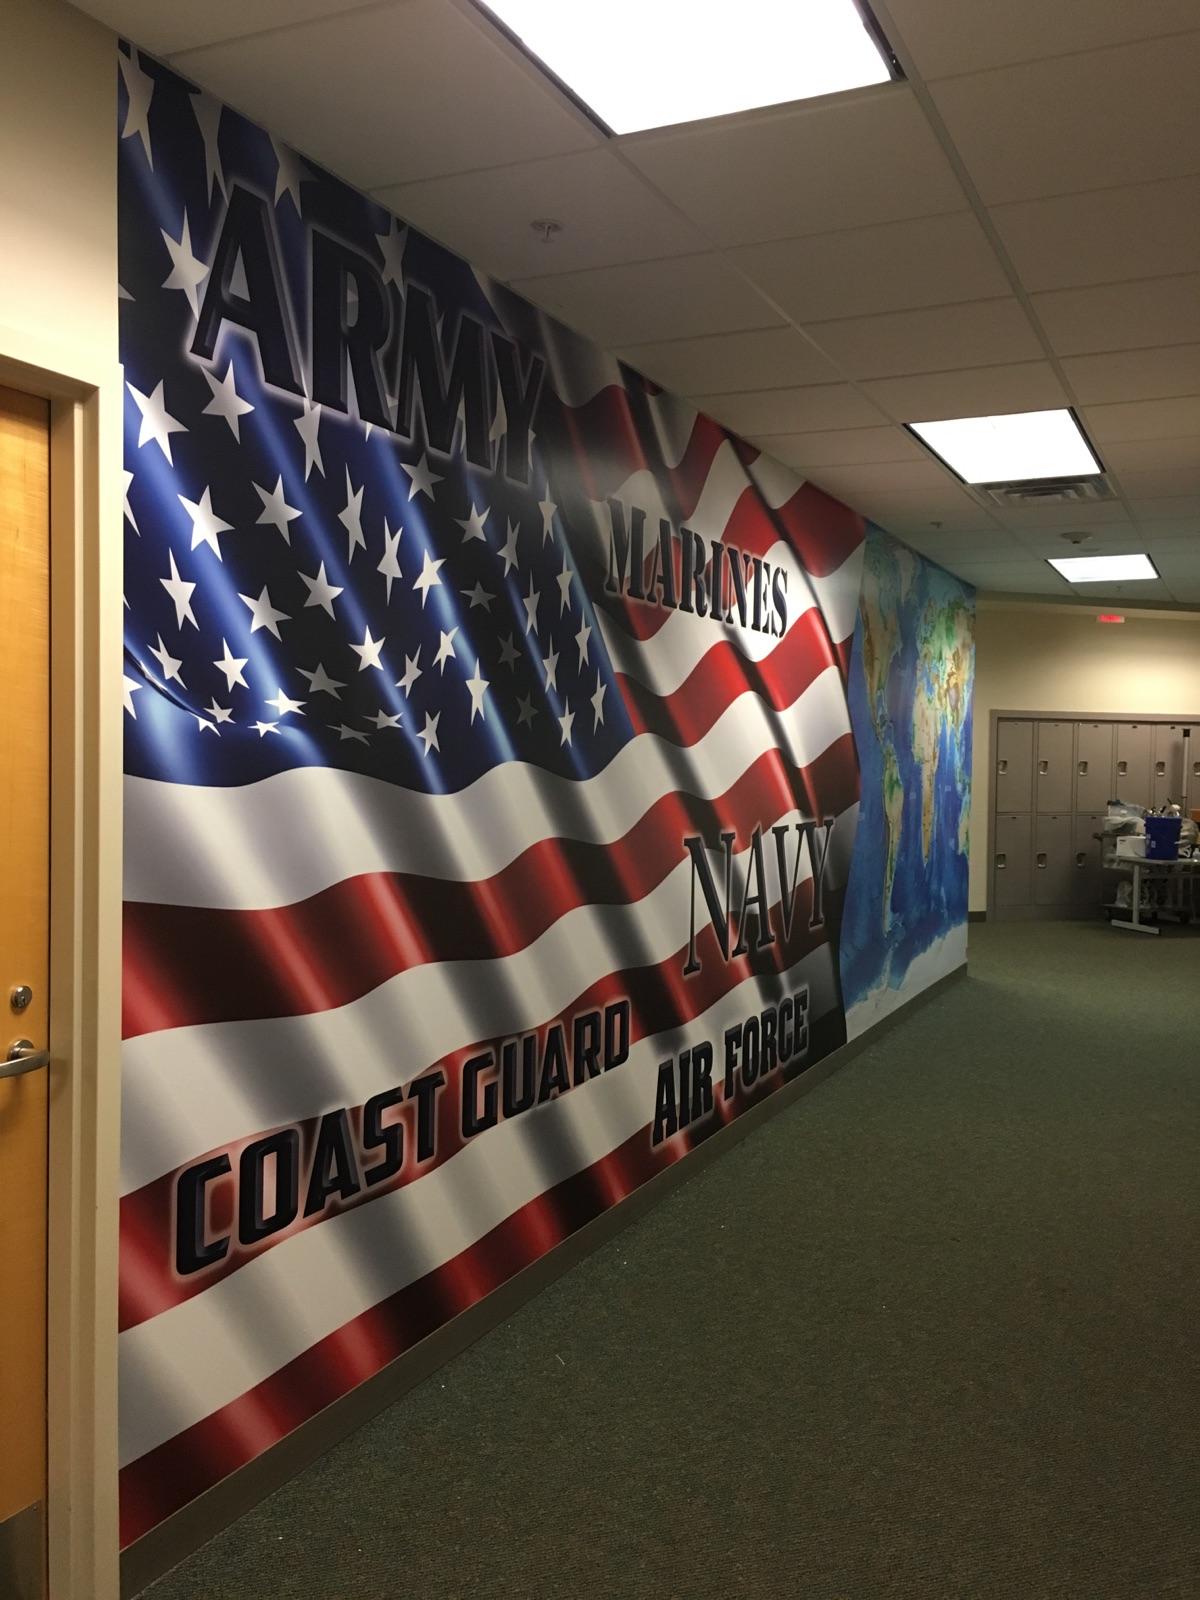 Wall mural showing an American flag and various military branches on an indoor wall